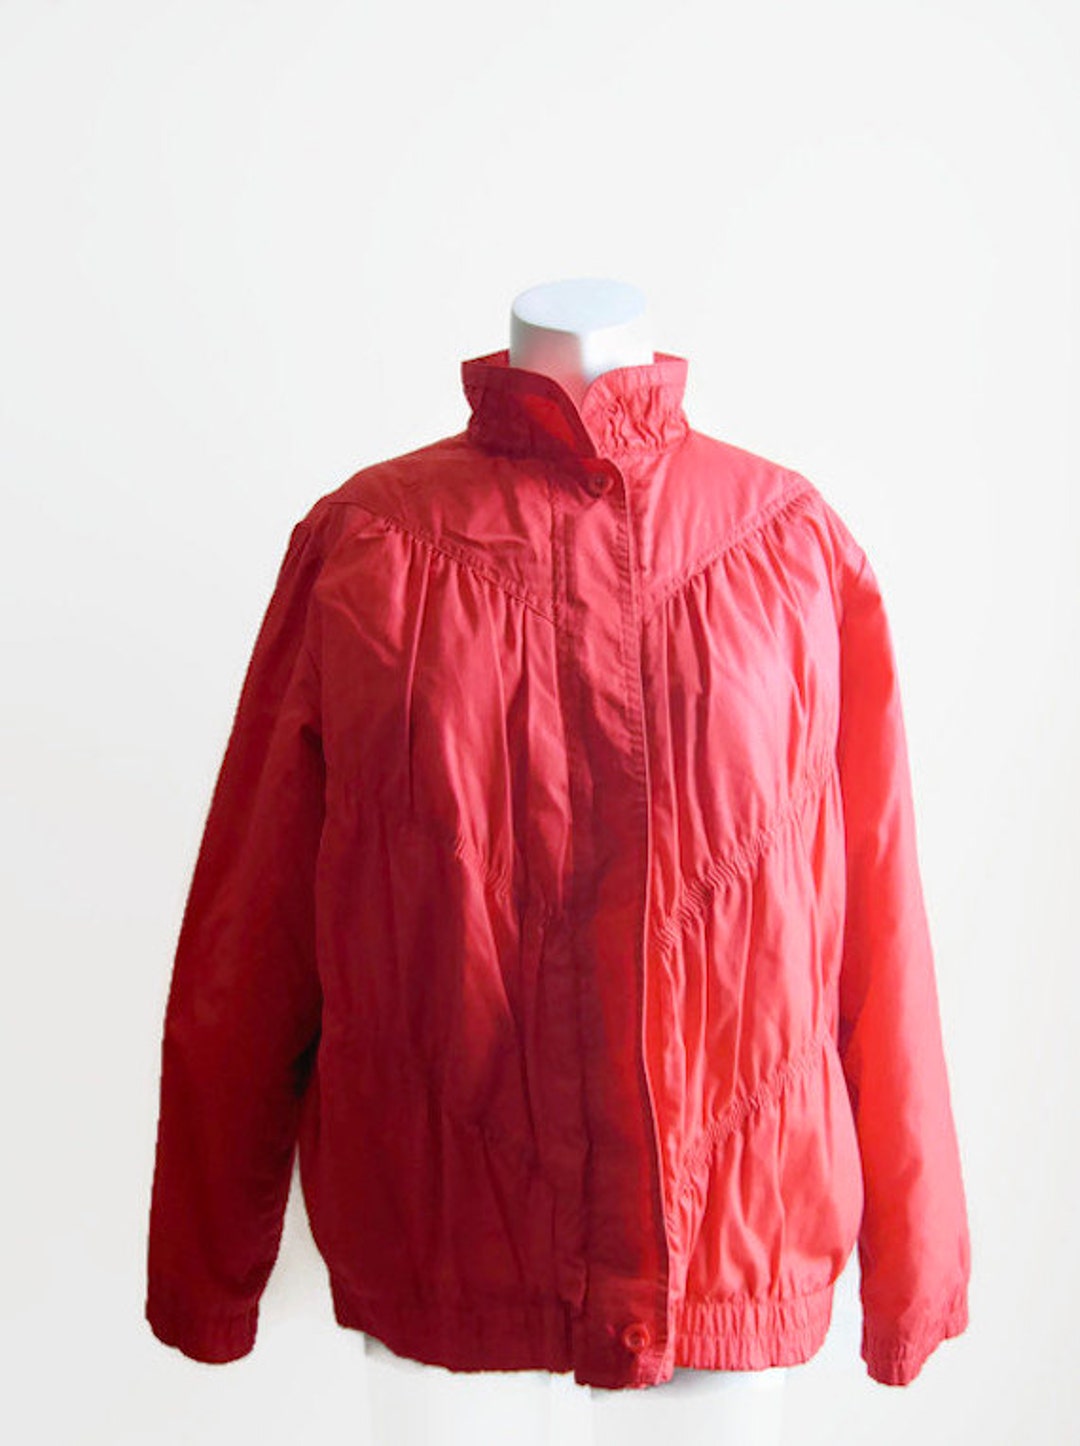 Vintage Braetan Jacket Red Women's Made in Thailand Poly - Etsy